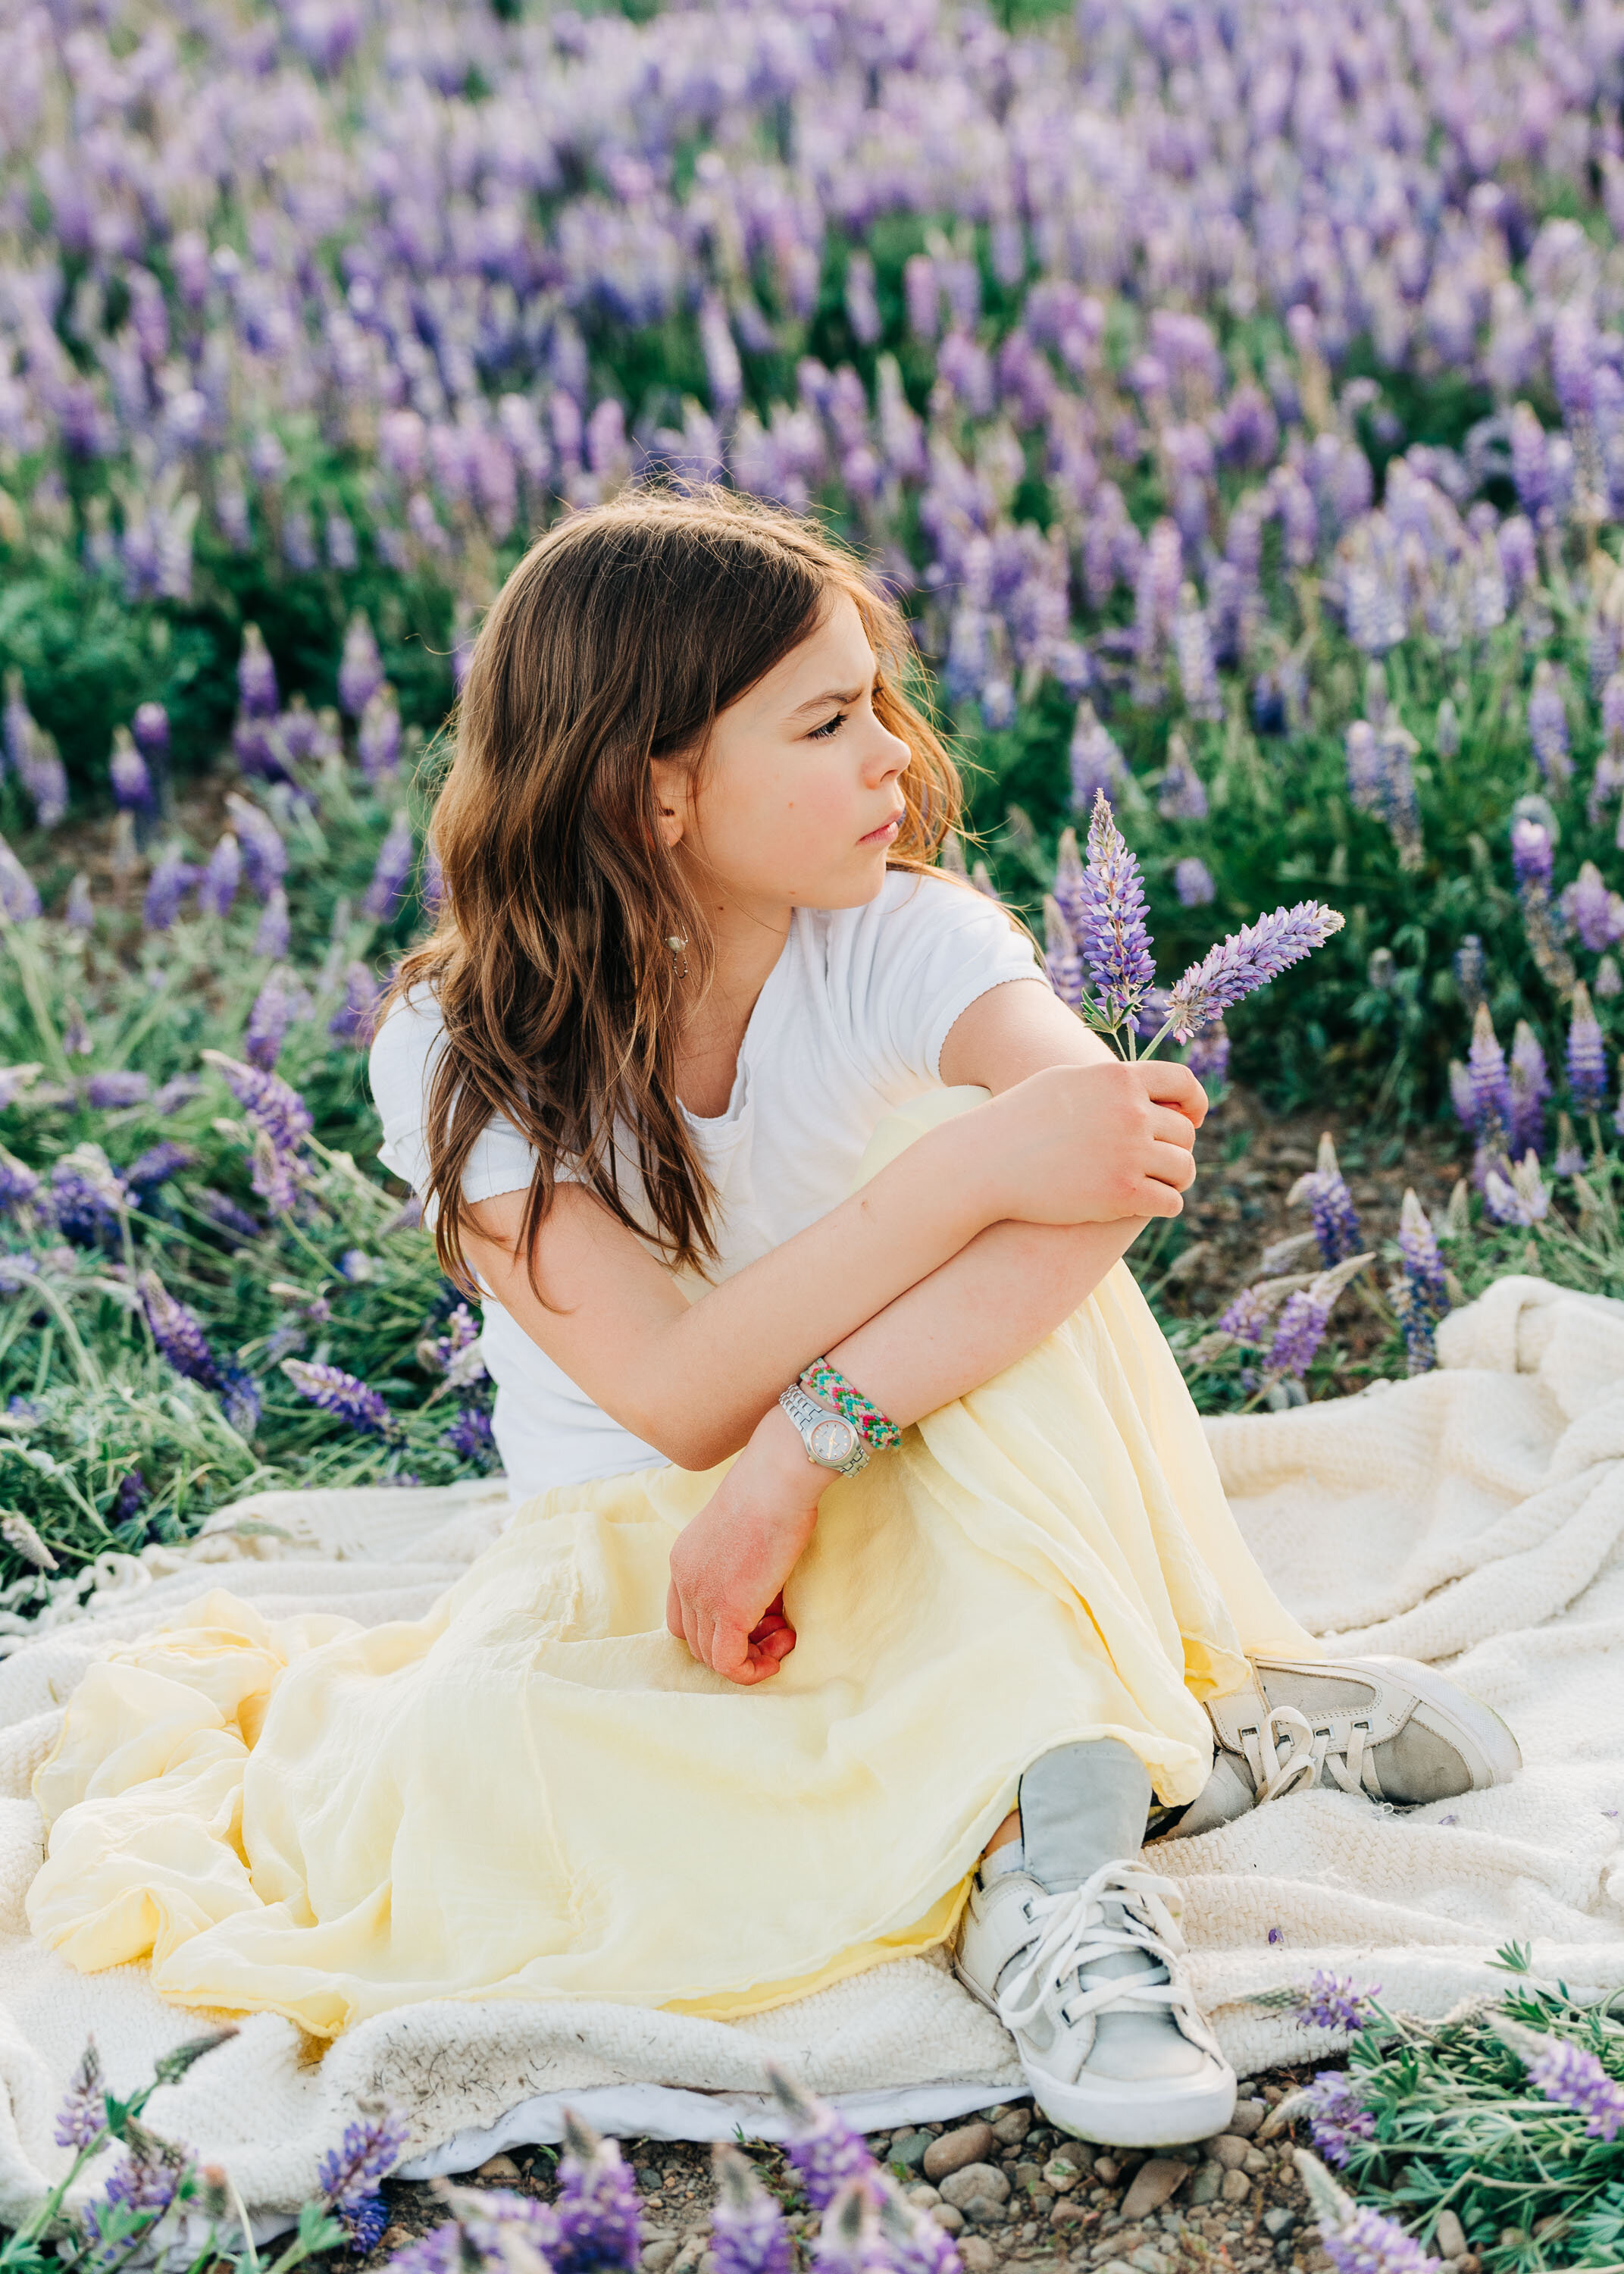 Lupine Wildflowers in Truckee, Lifestyle Family Photography in Reno/Tahoe by Kelli Price Photography